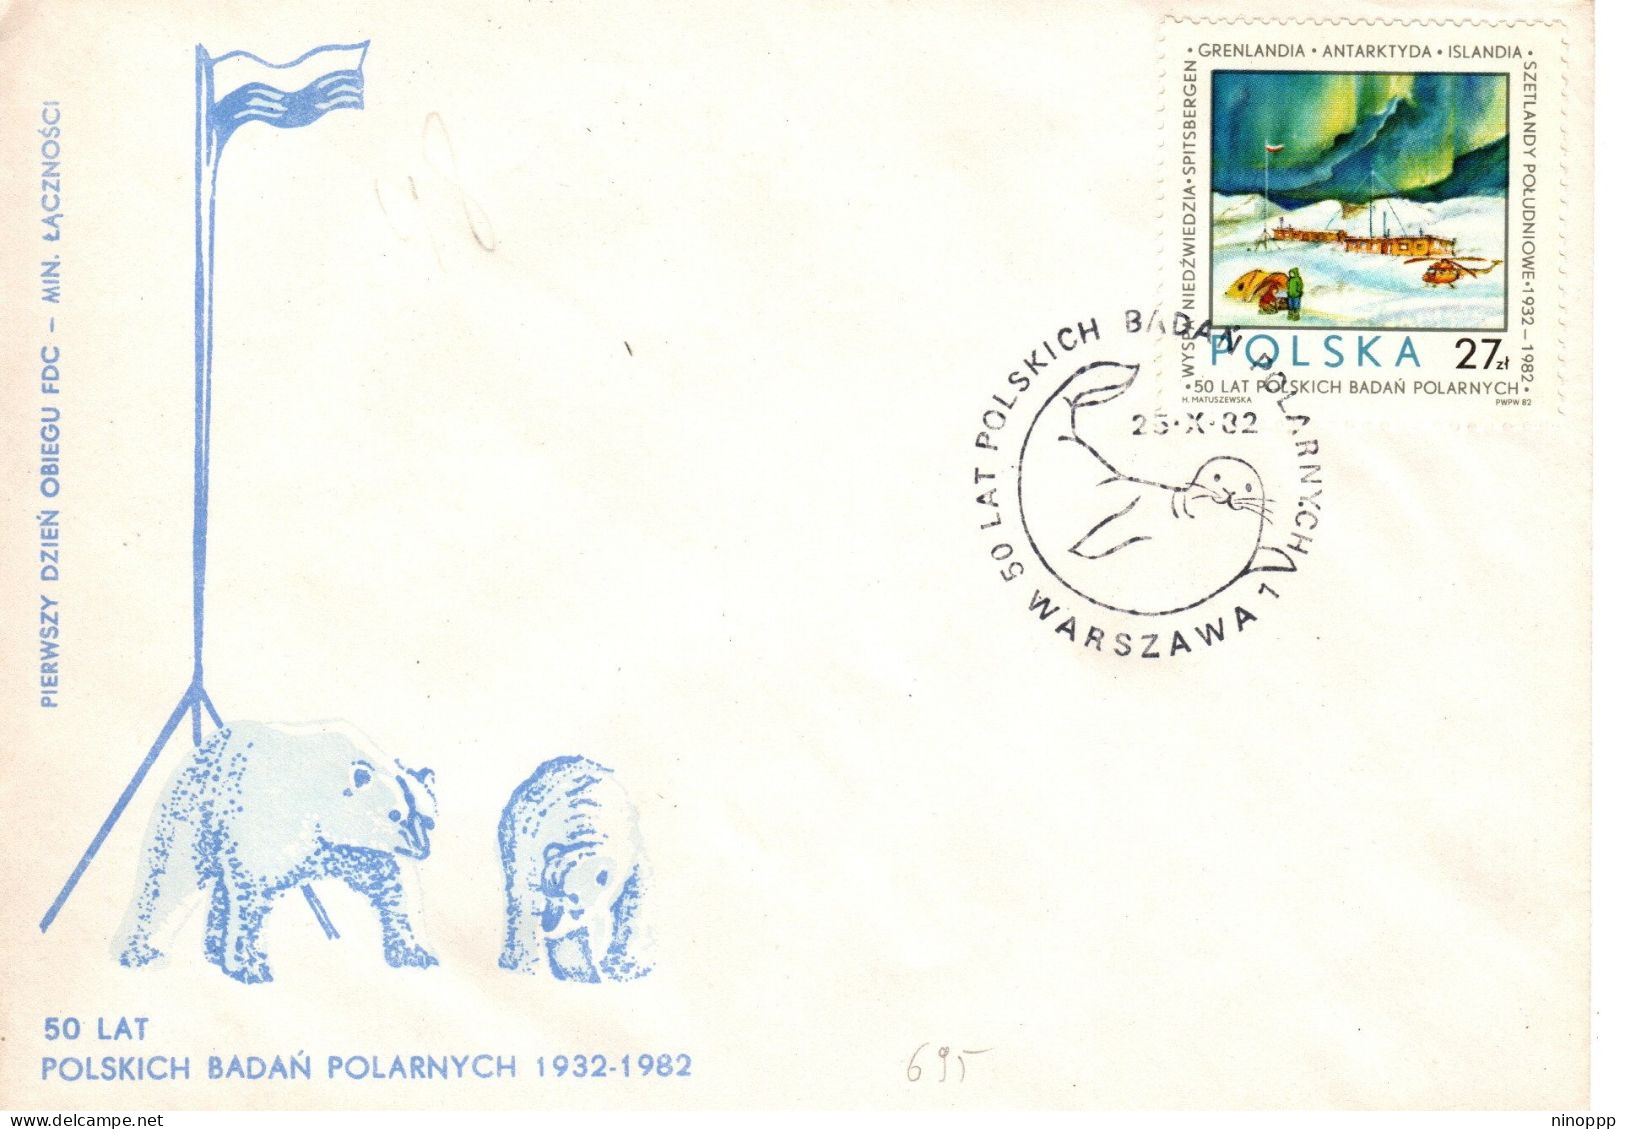 Poland 1982 Polar Research First Day Cover - FDC